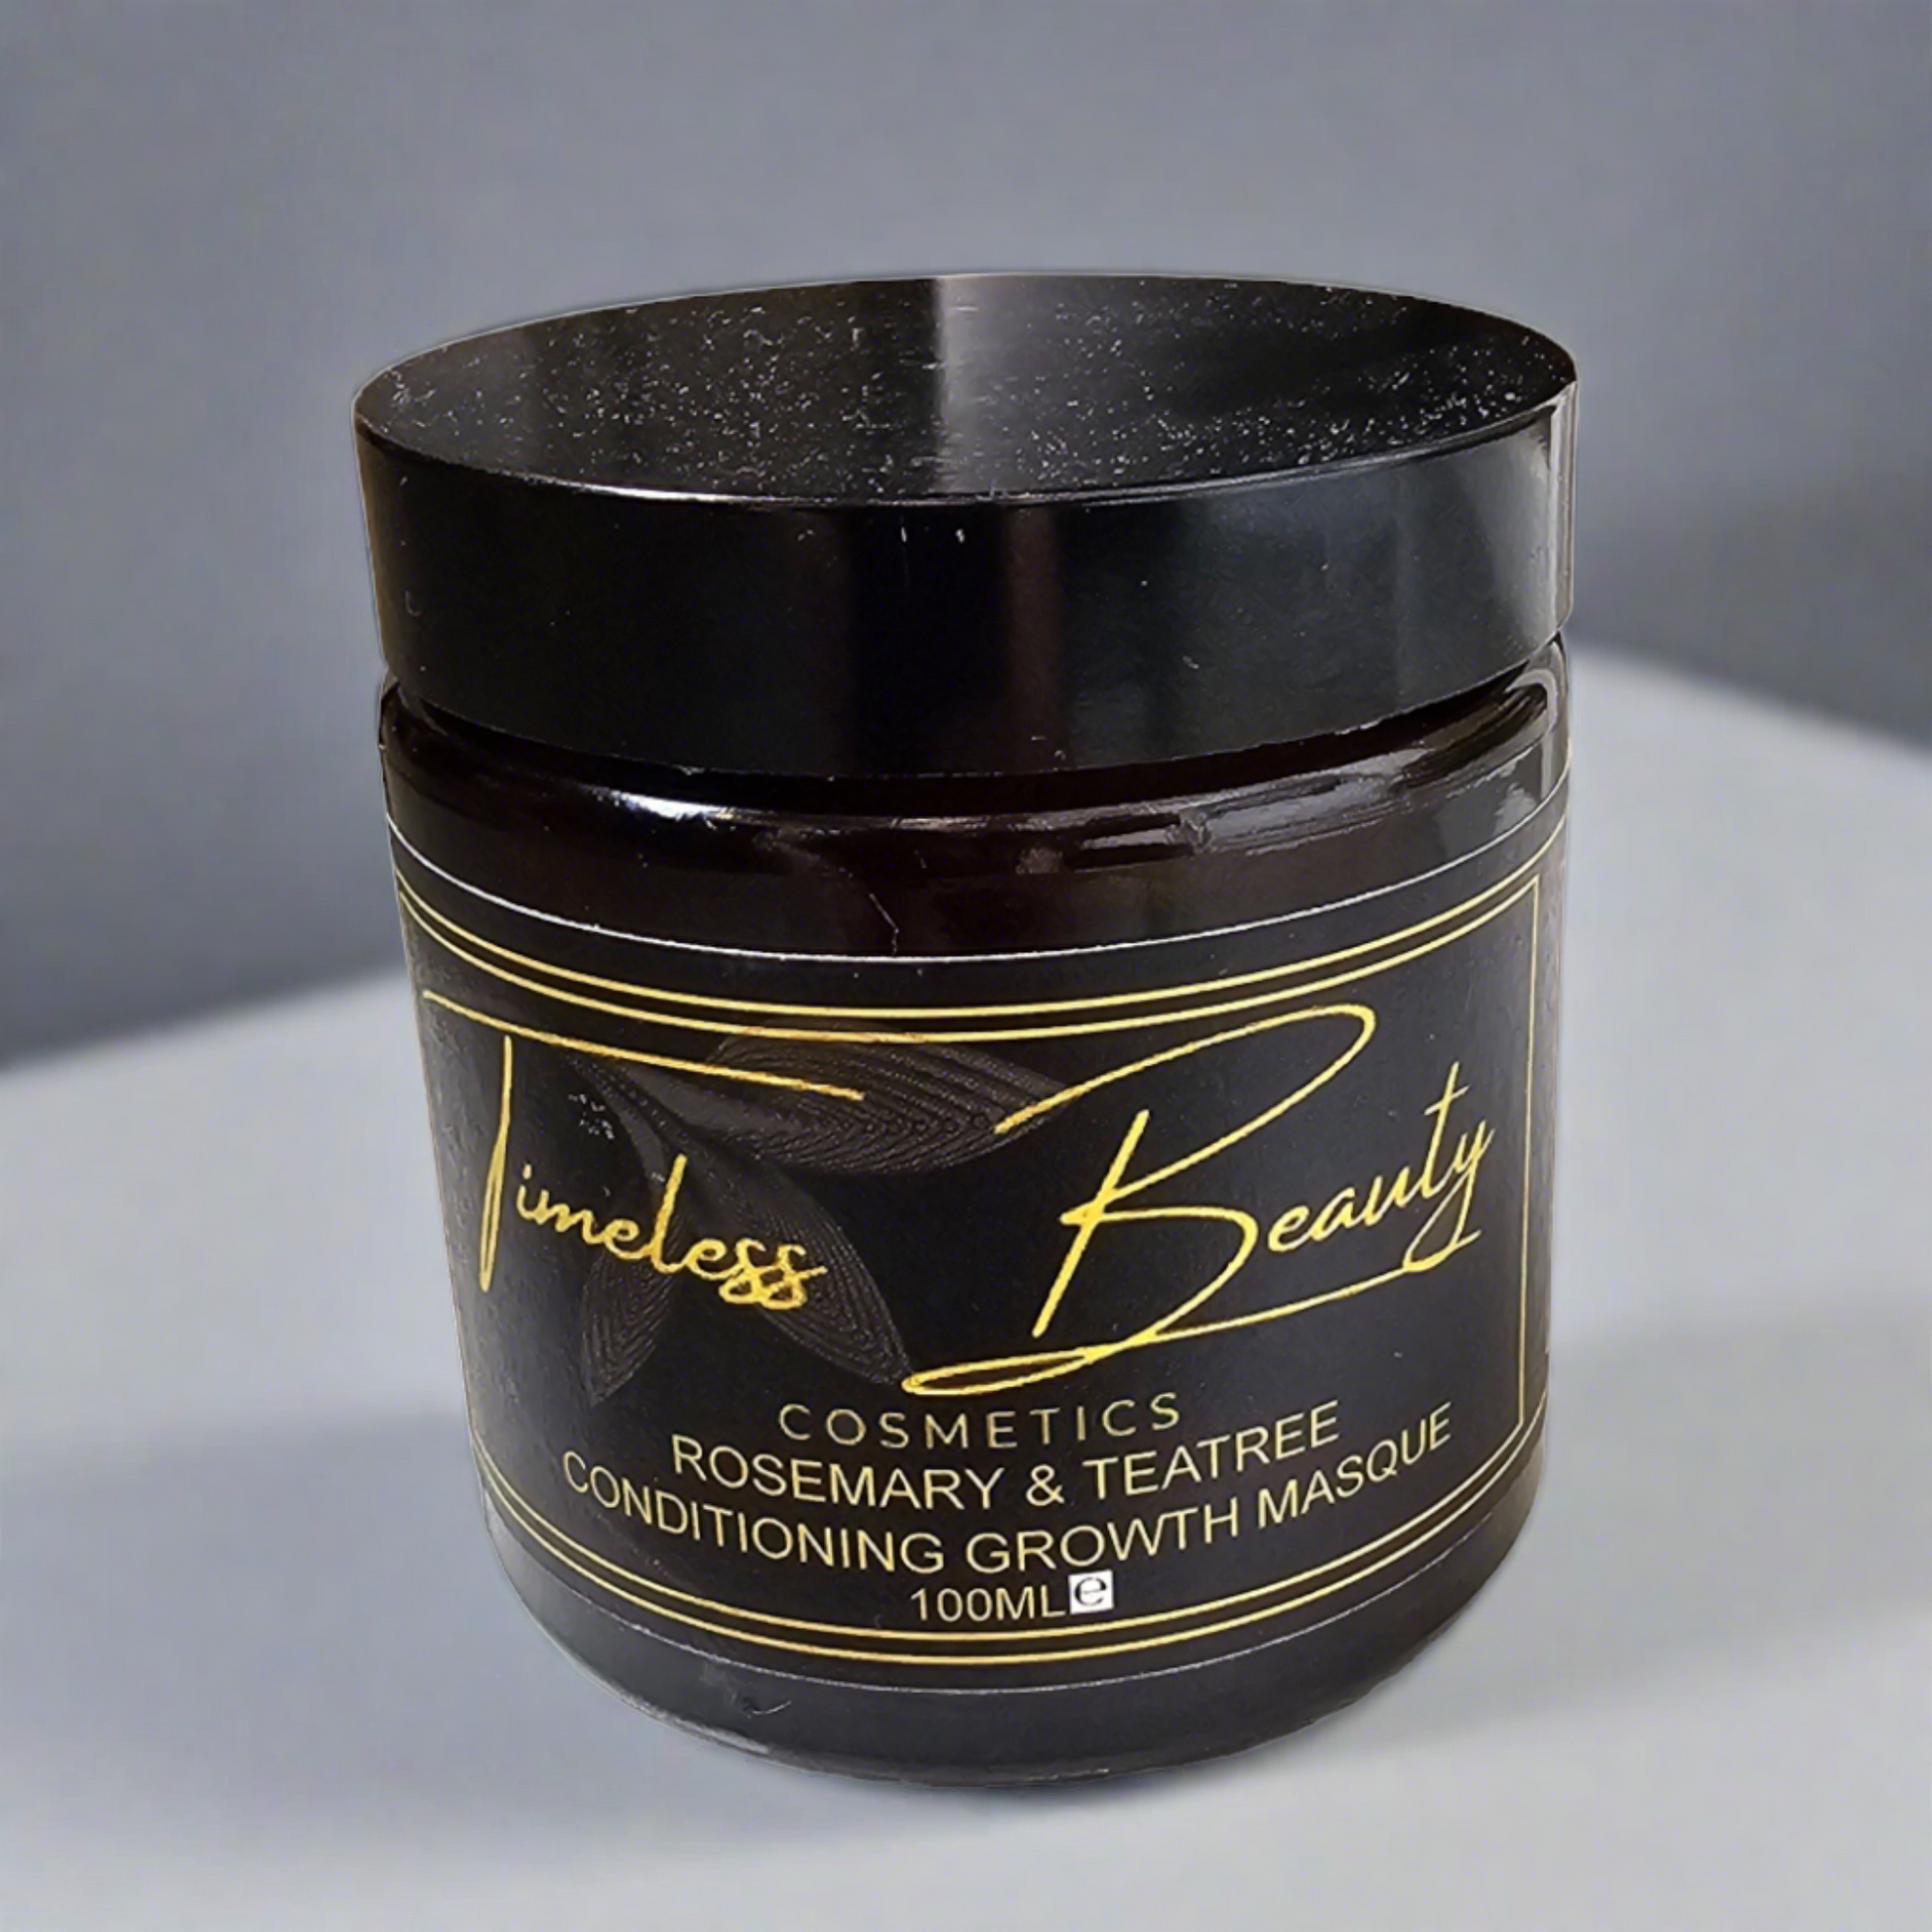 Rosemary & Teatree Hair and Scalp conditioning Masque Organic